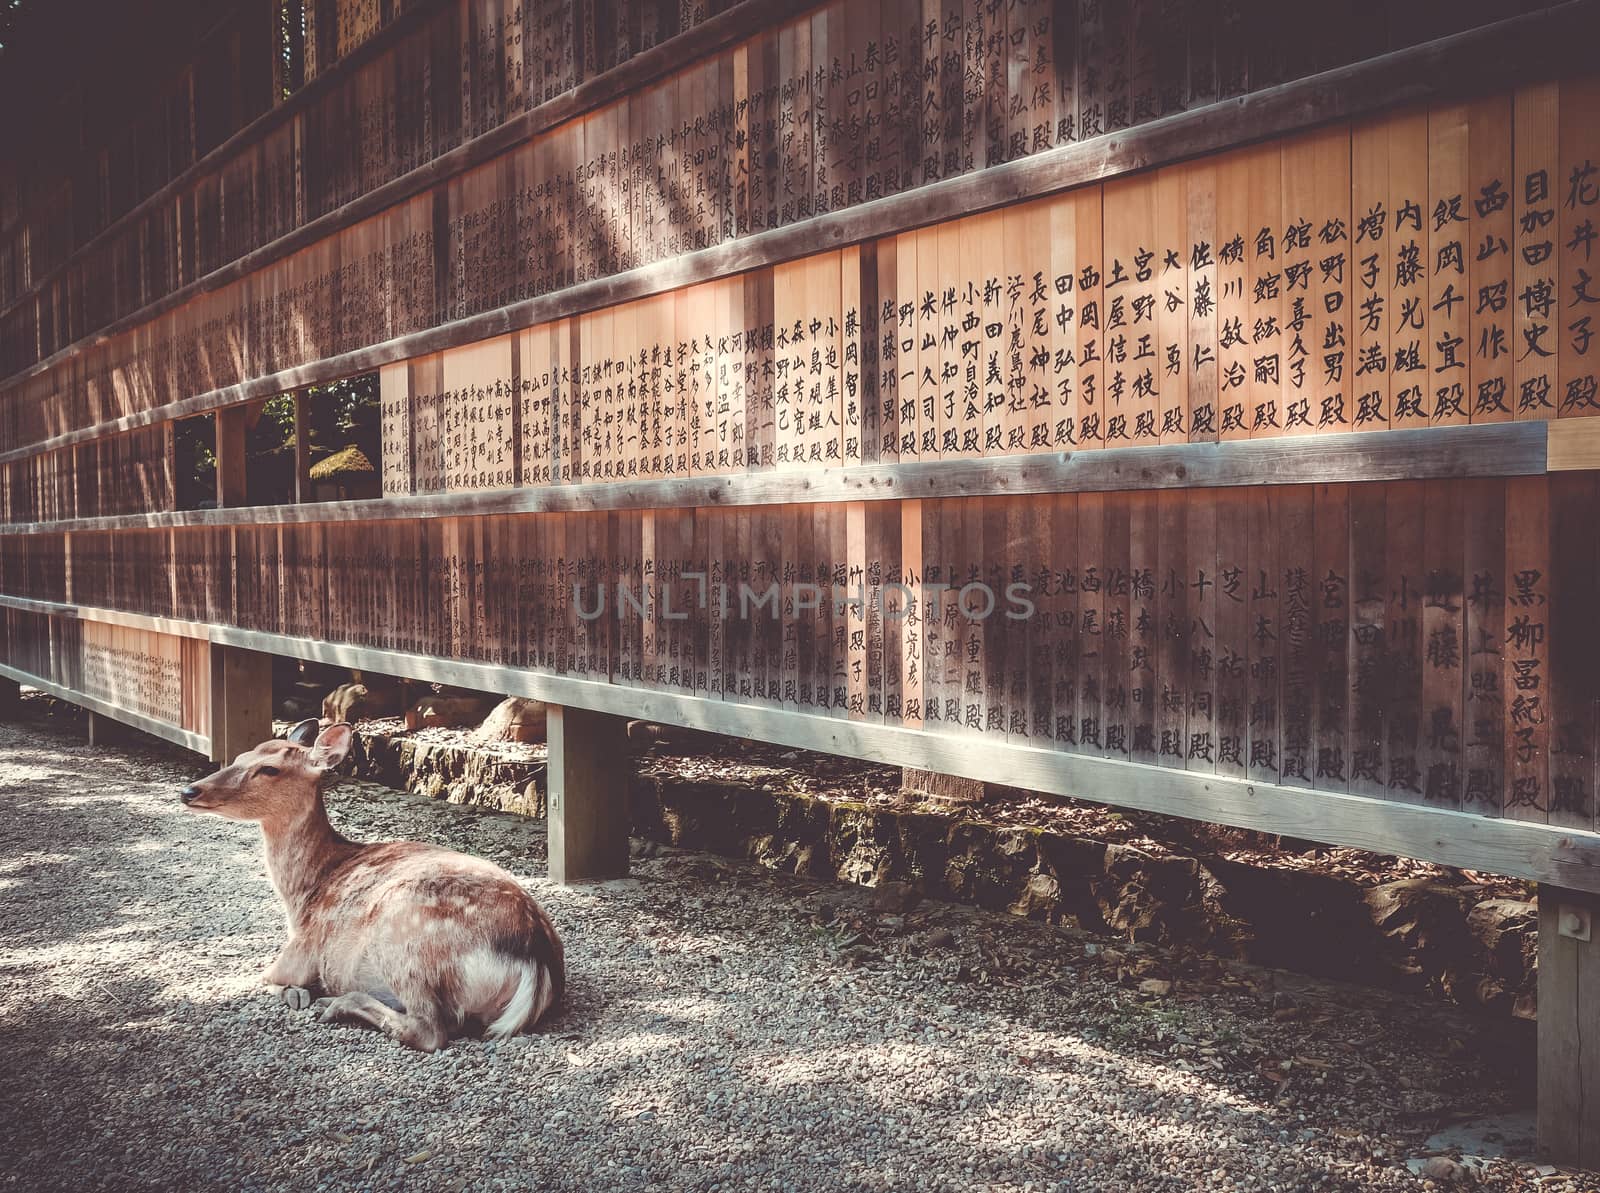 Deer in front of Wooden tablets, Nara, Japan by daboost